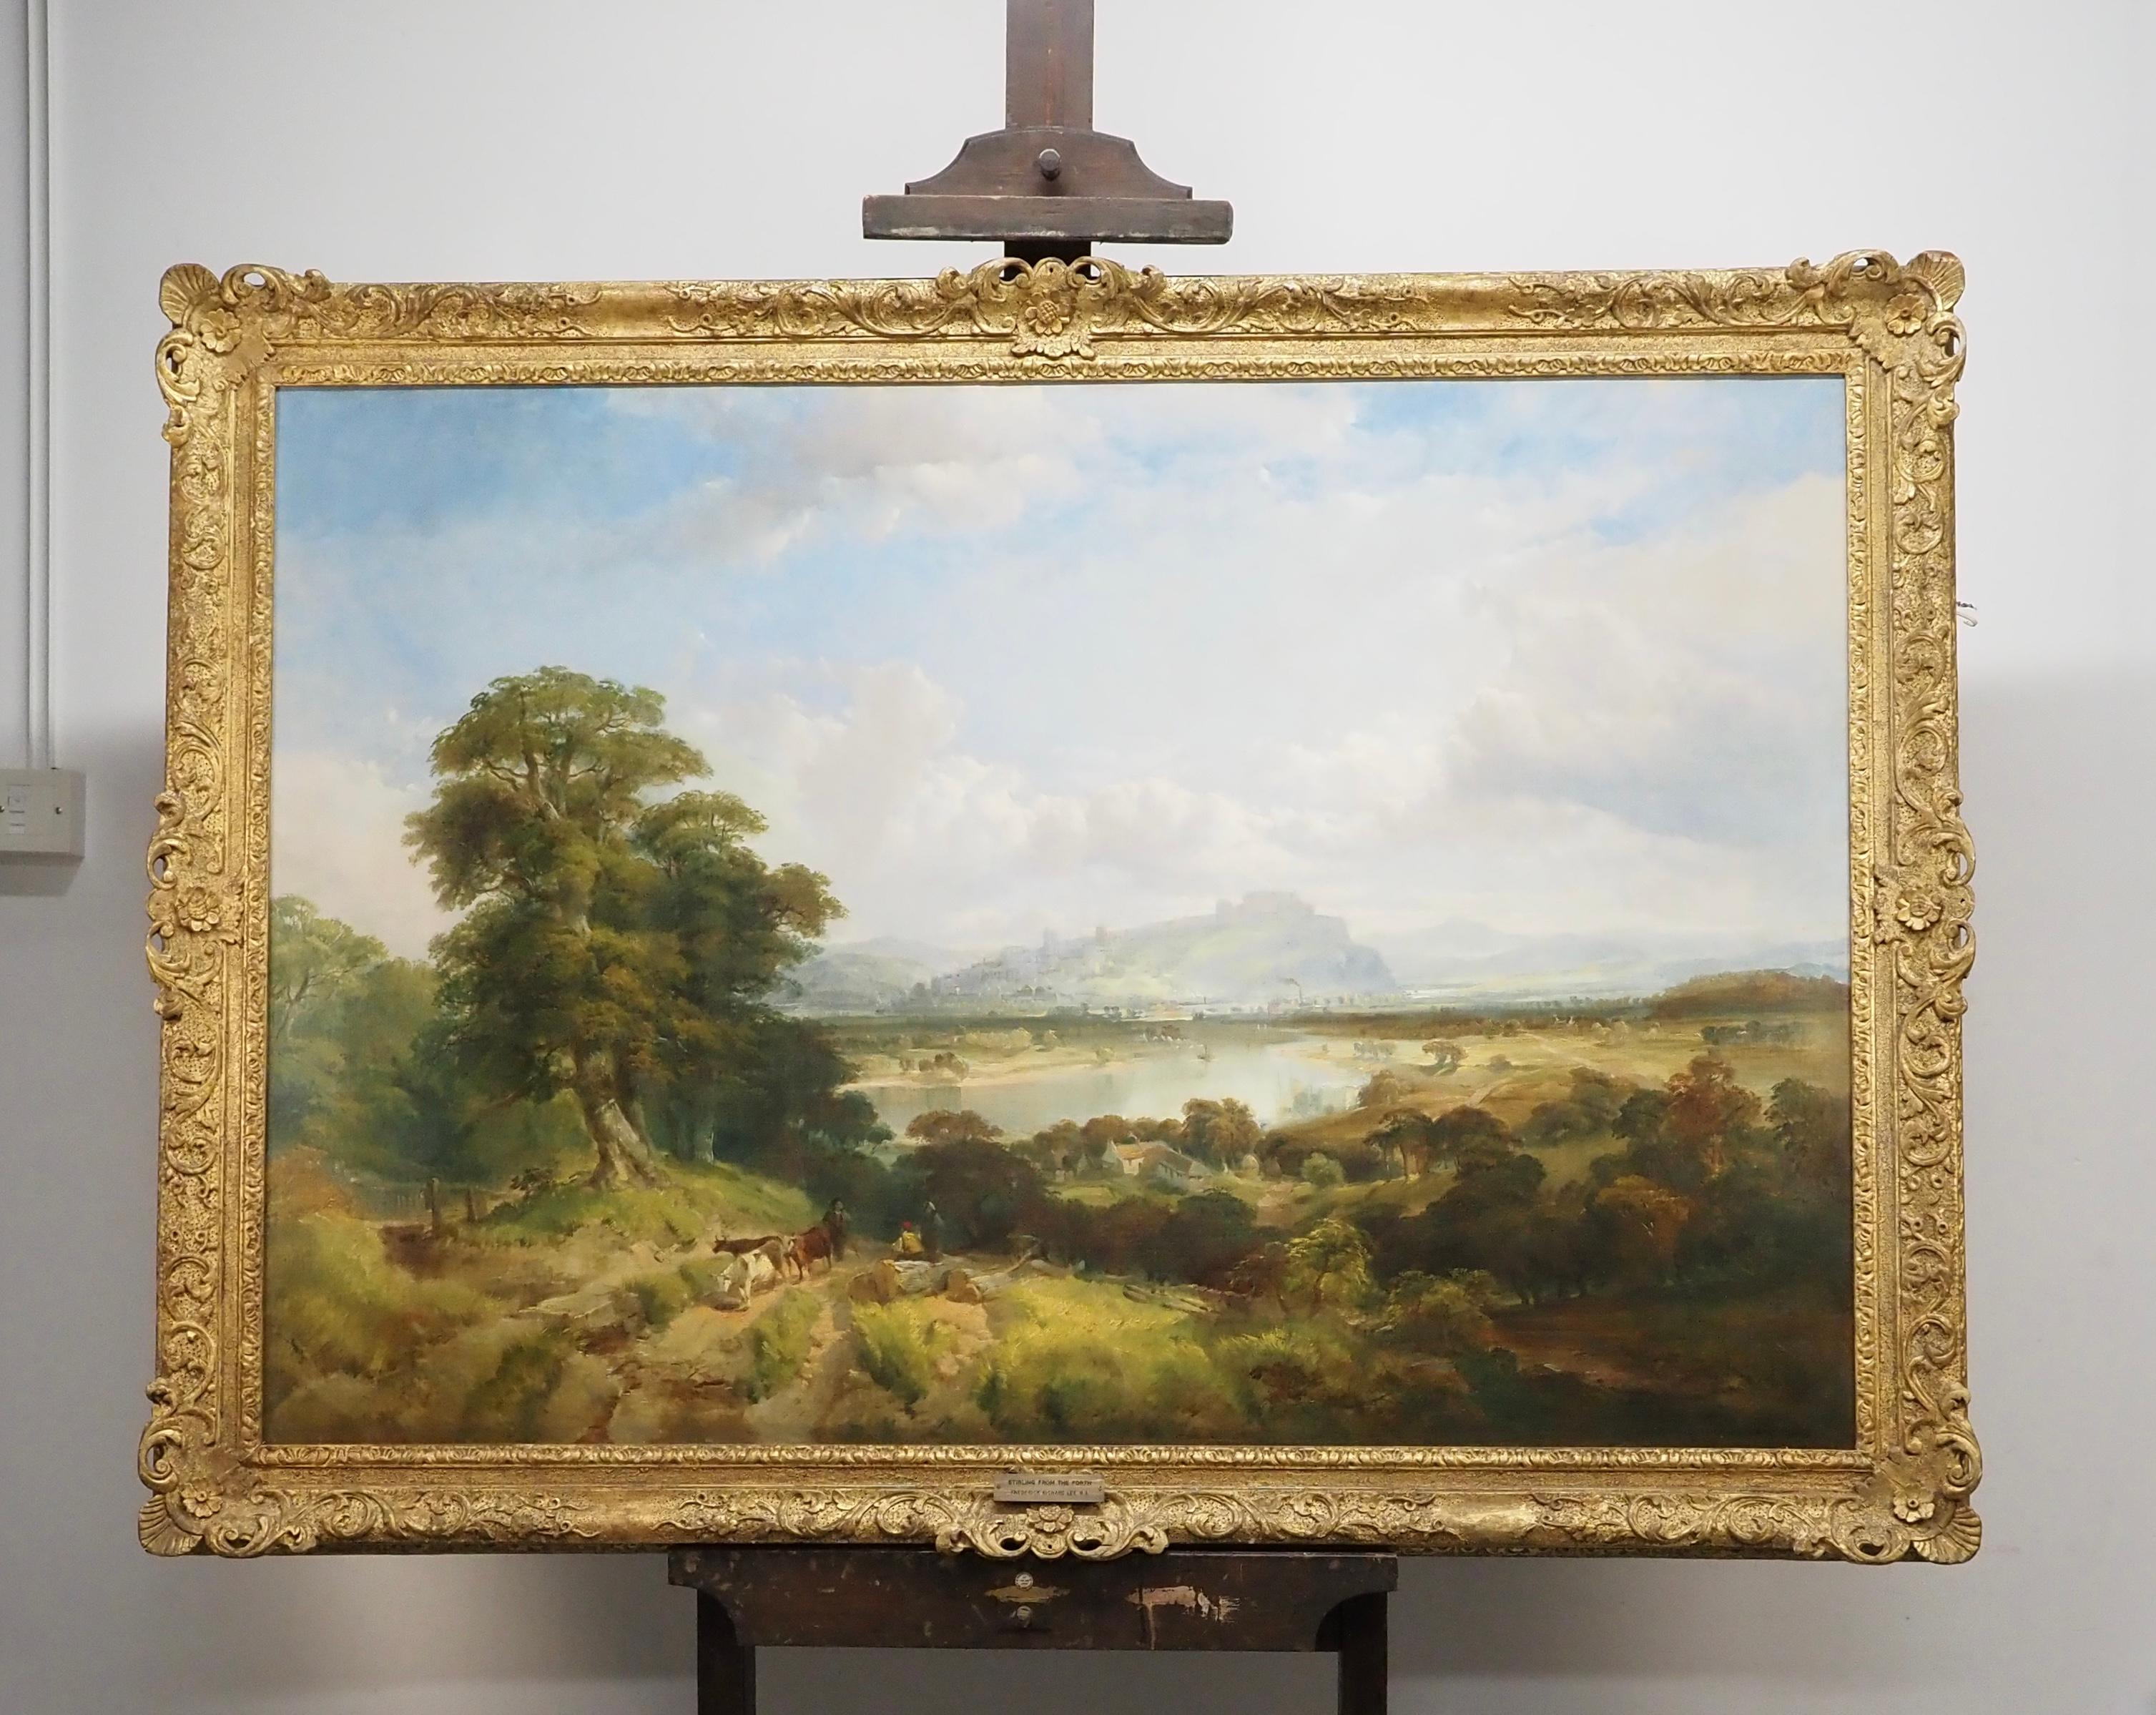 Frederick Richard Lee RA (1798-1879)
View of Stirling from the Forth
Oil on canvas
Canvas size - 38 x 55 in

Provenance
with Ian MacNicol, Glasgow; 
where purchased by the present owner, May 1975

Frederick Richard Lee was born in Barnstaple, Devon.